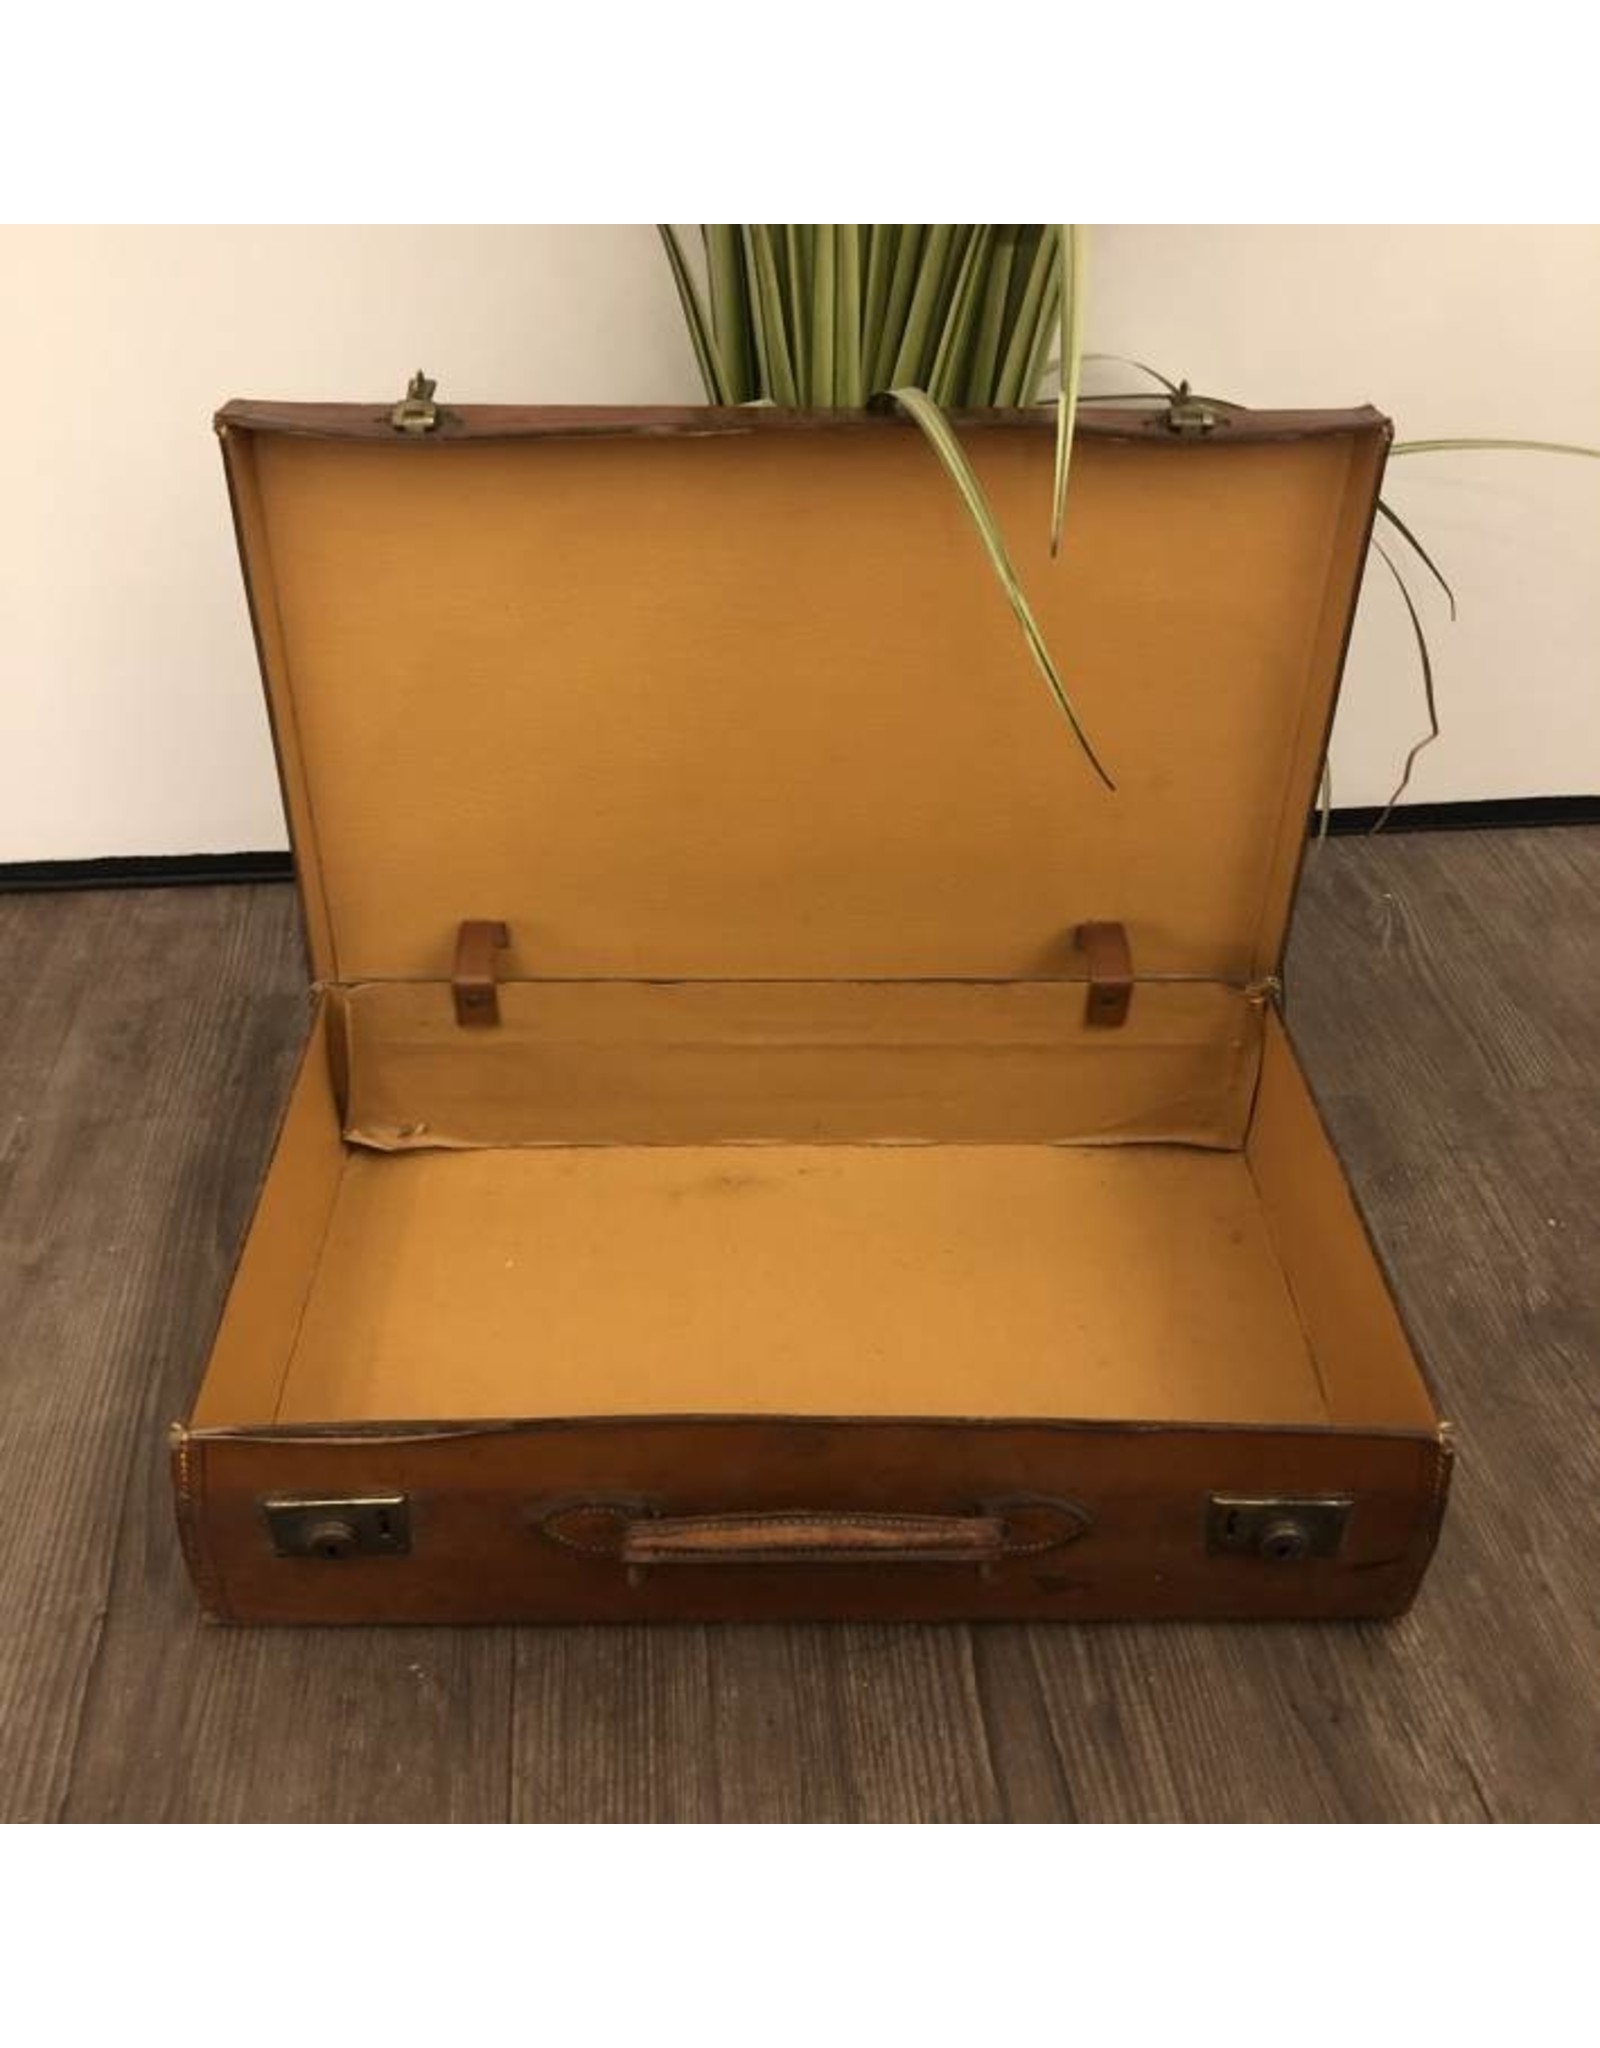 Suitcase - stamped with initials DSW